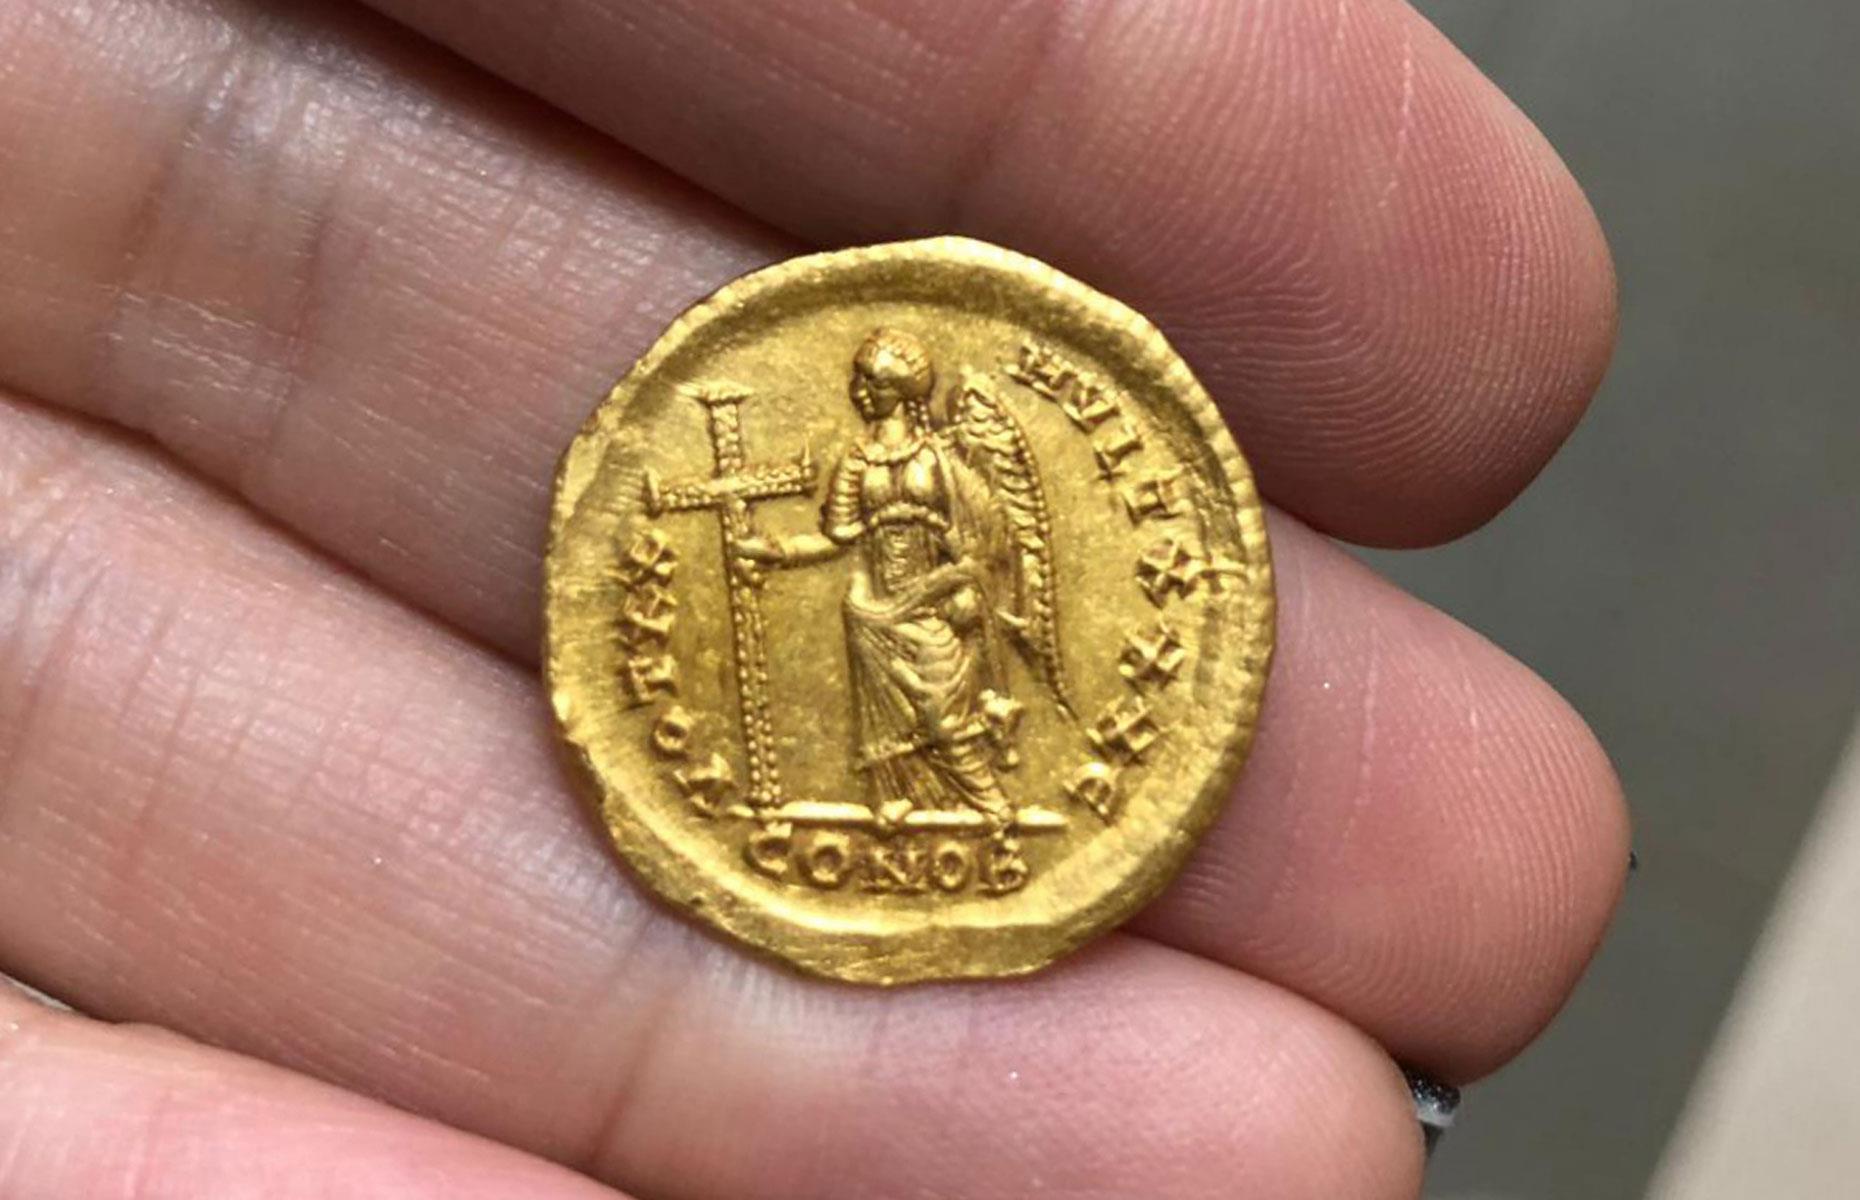 The fifth-century Byzantine gold coin